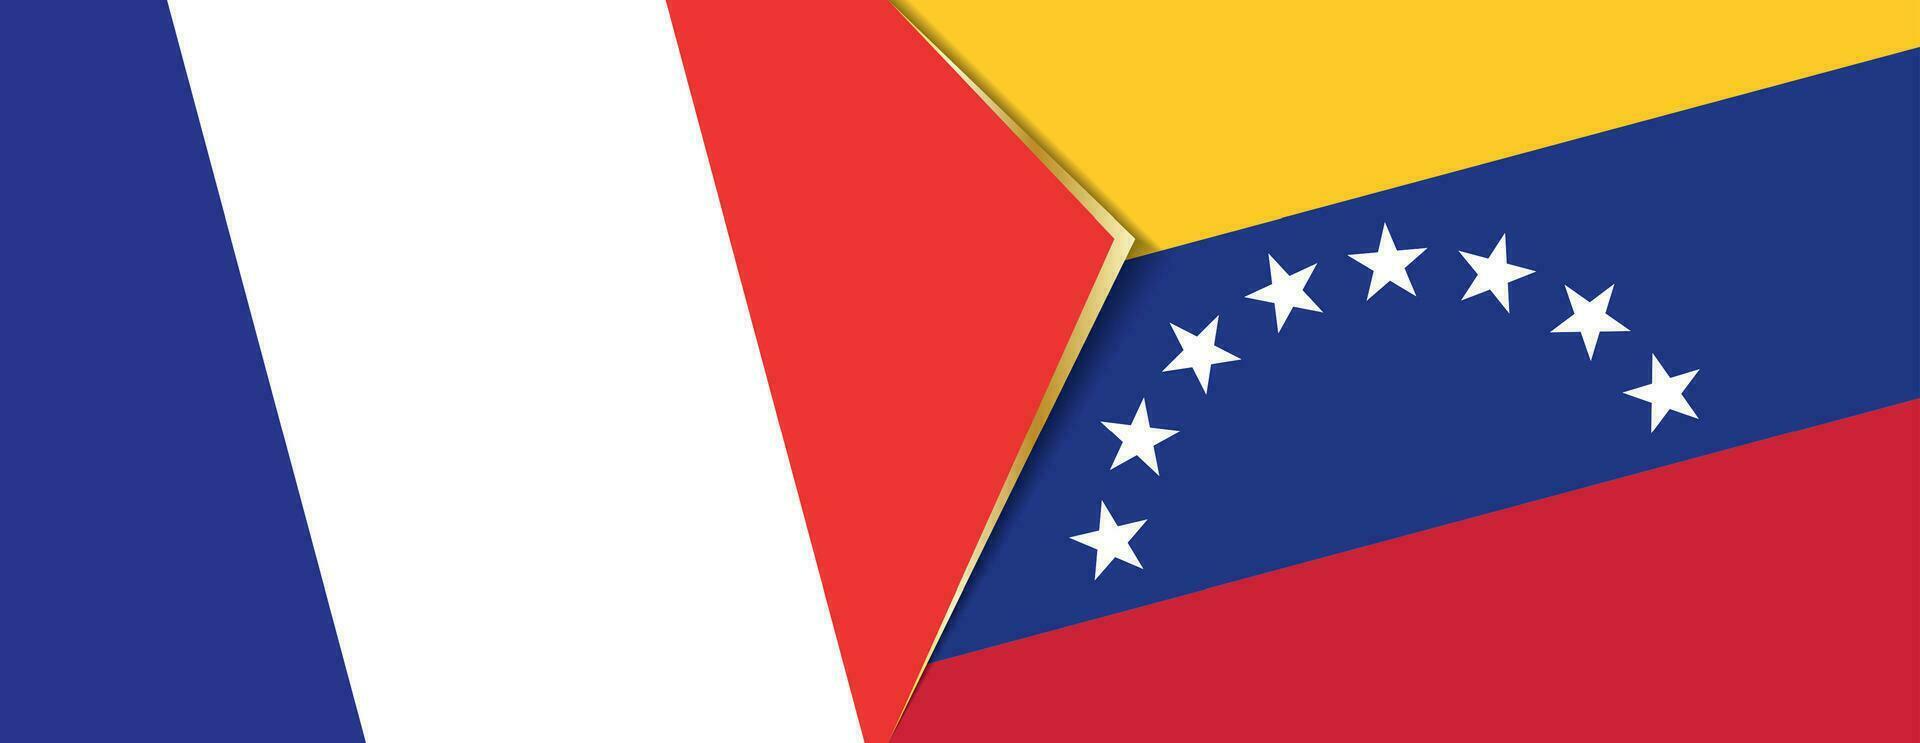 France and Venezuela flags, two vector flags.